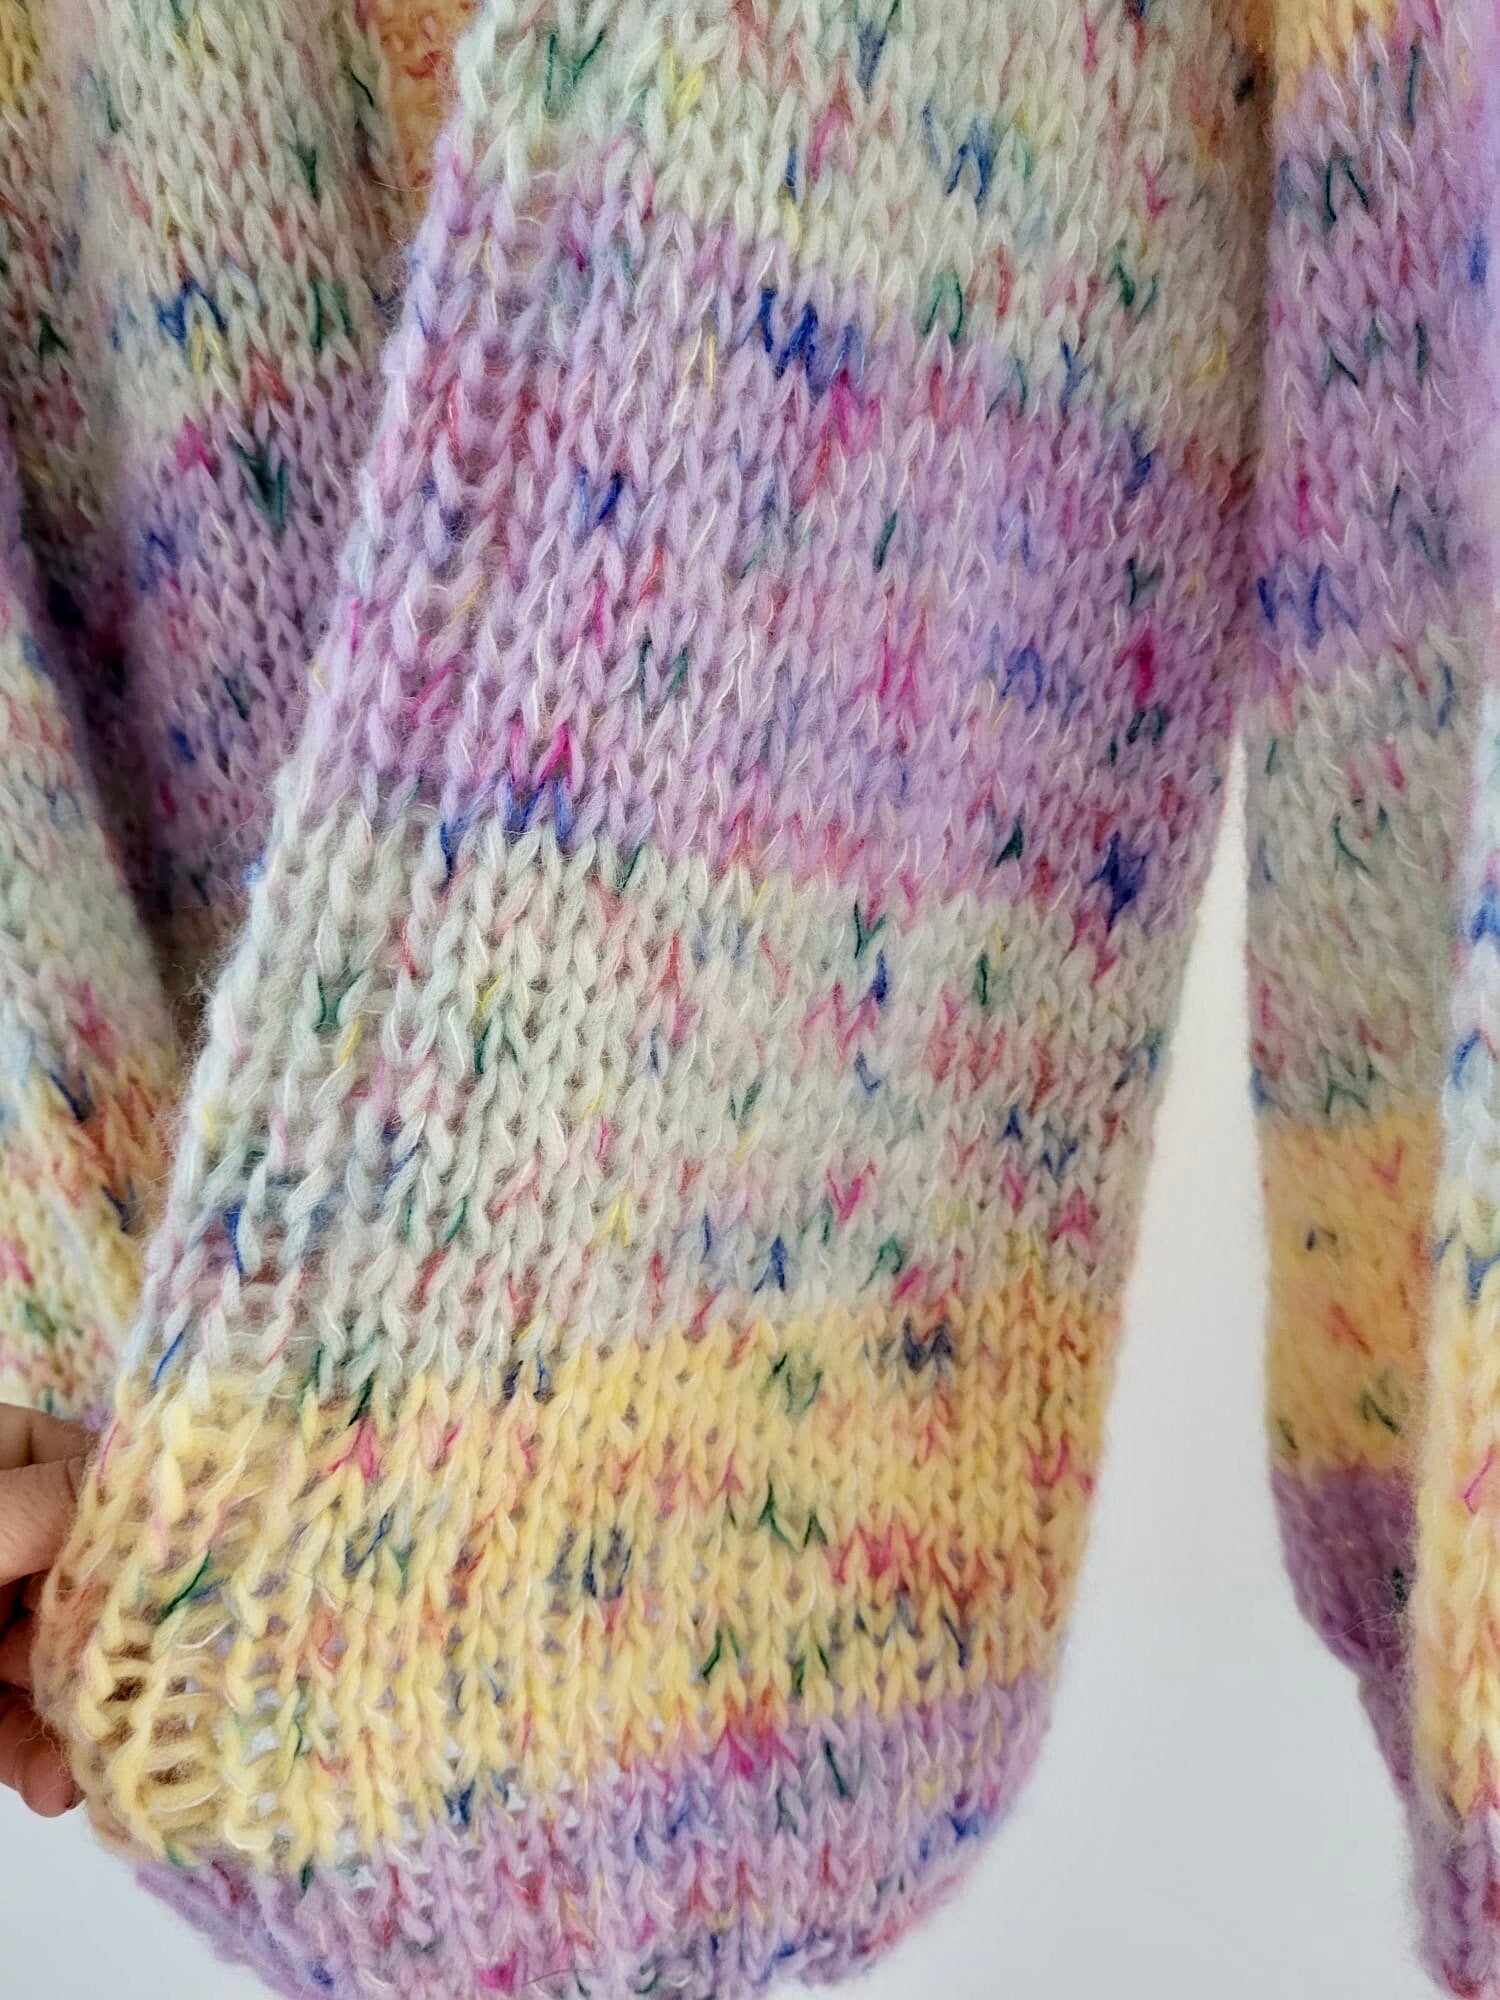 LEELA Alpaca Mohair Cardigan with Balloon Sleeves, Relaxed Fit, Hand Knit, Pastel Cardigan, Colourful Cardigan, Multicolor Cardigan